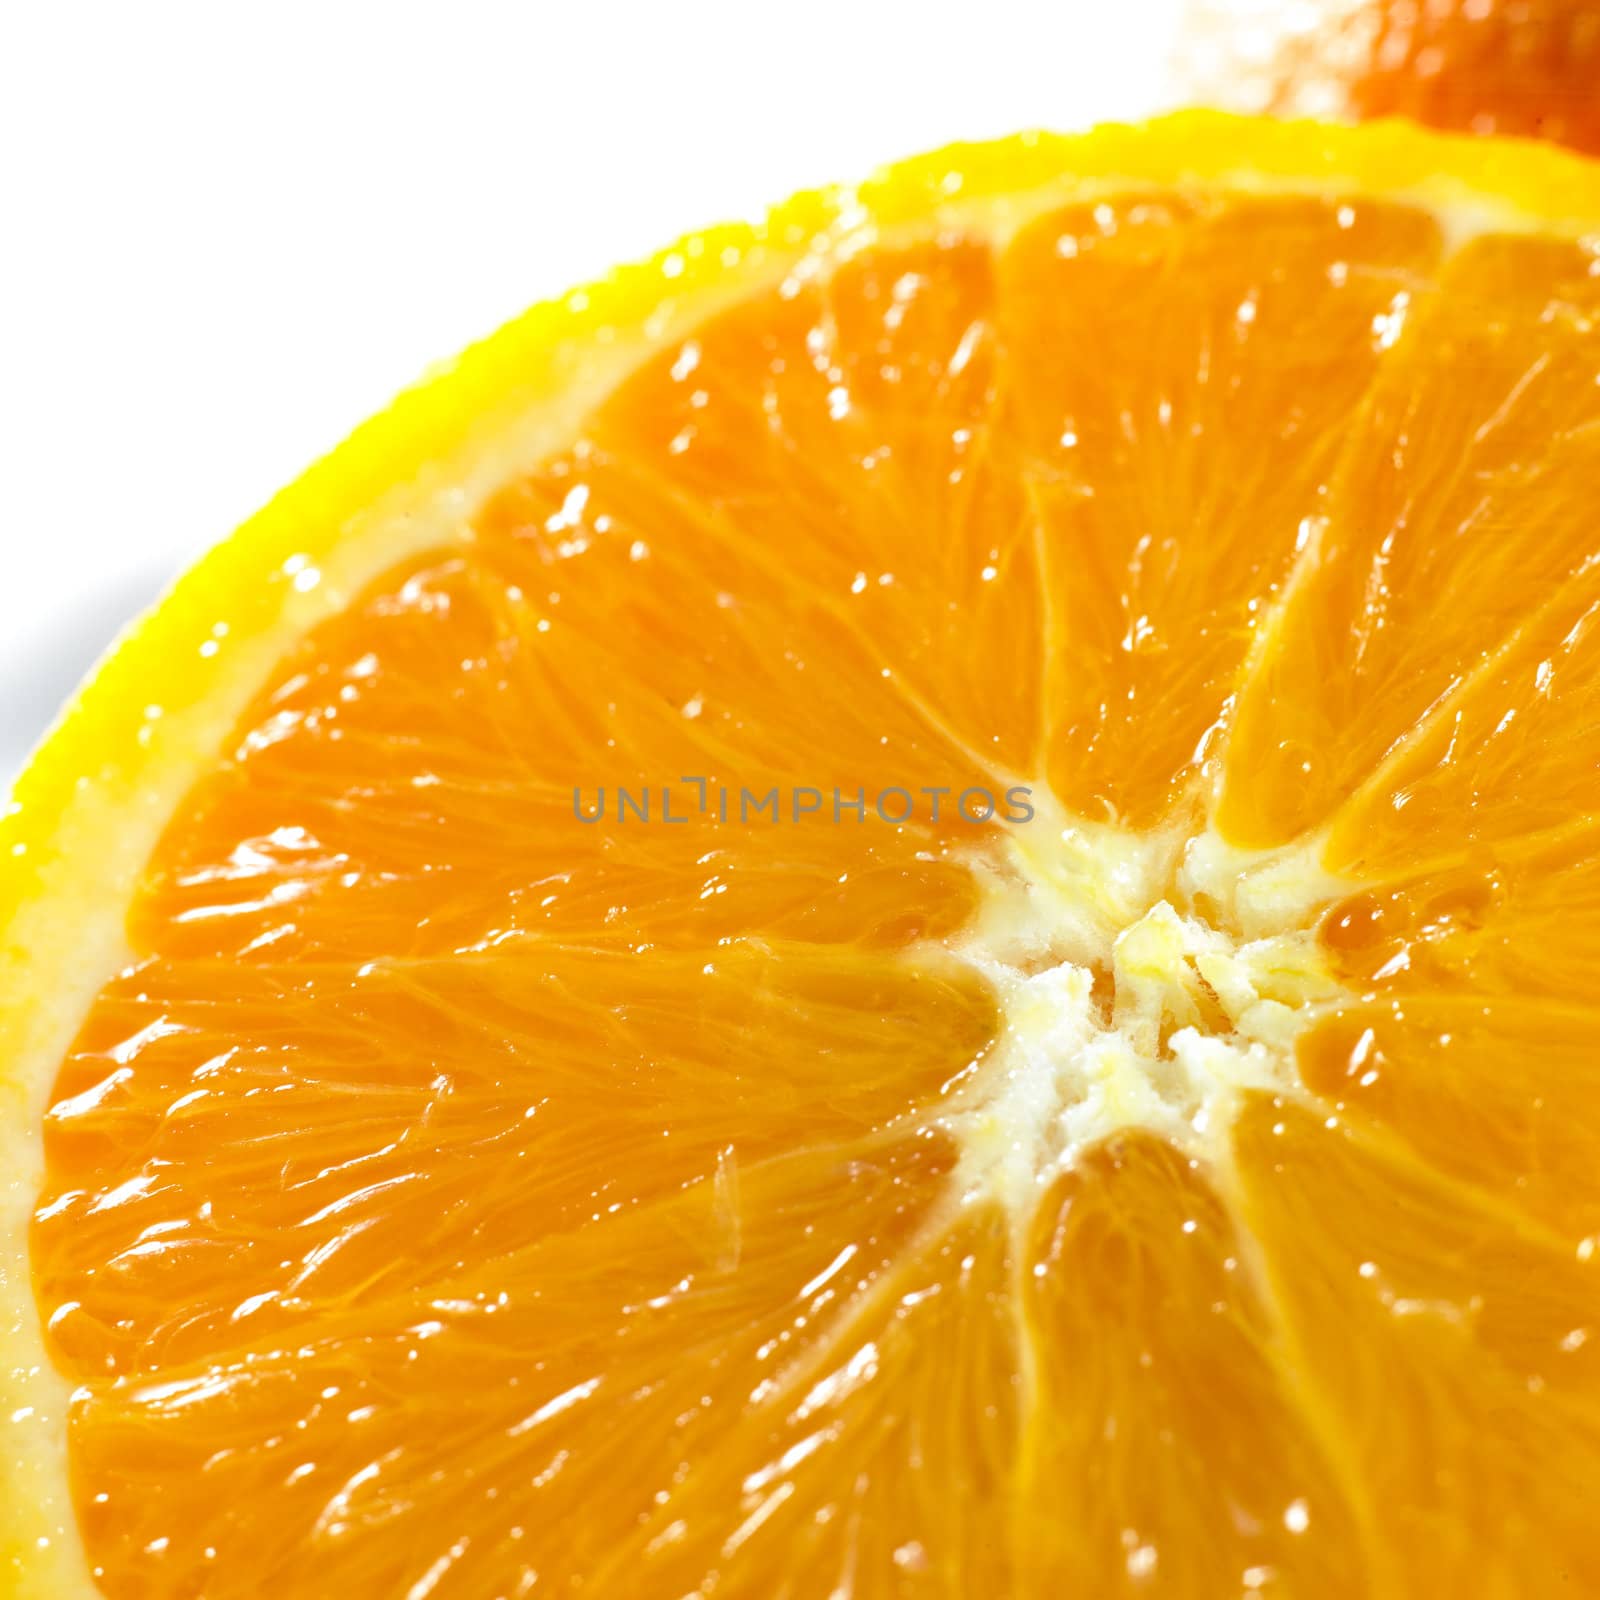 close-up of an orange isolated on a white background